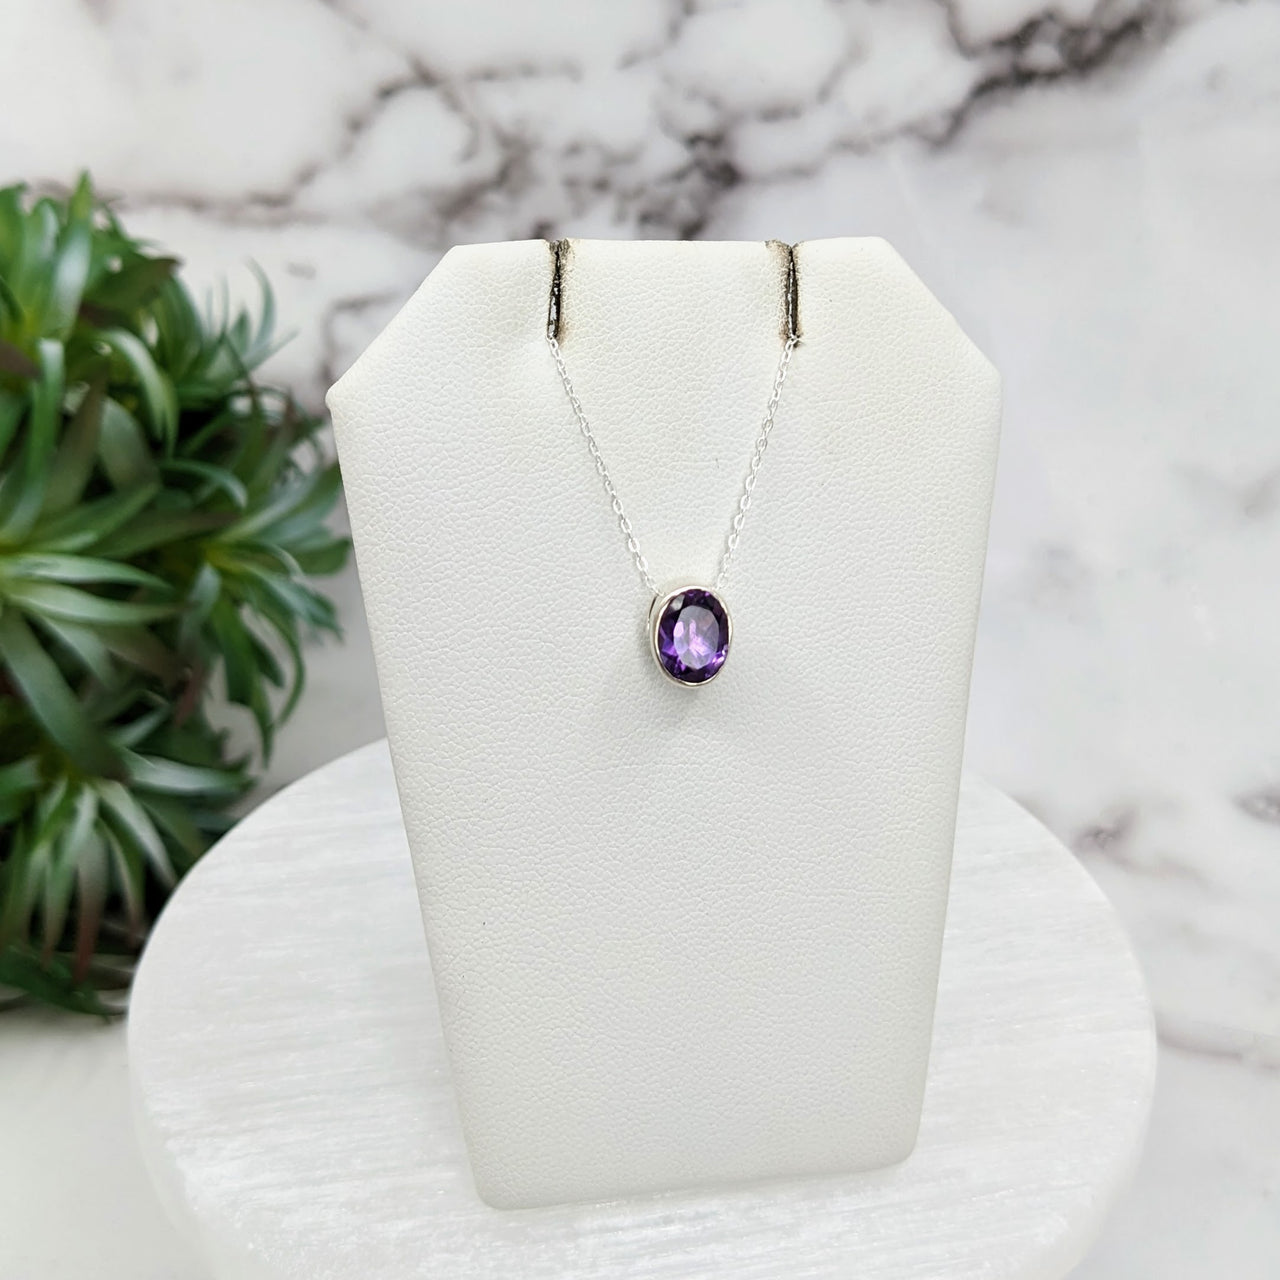 Amethyst Faceted Necklace Sterling Silver Slider Pendant on 18" Chain #LV3254